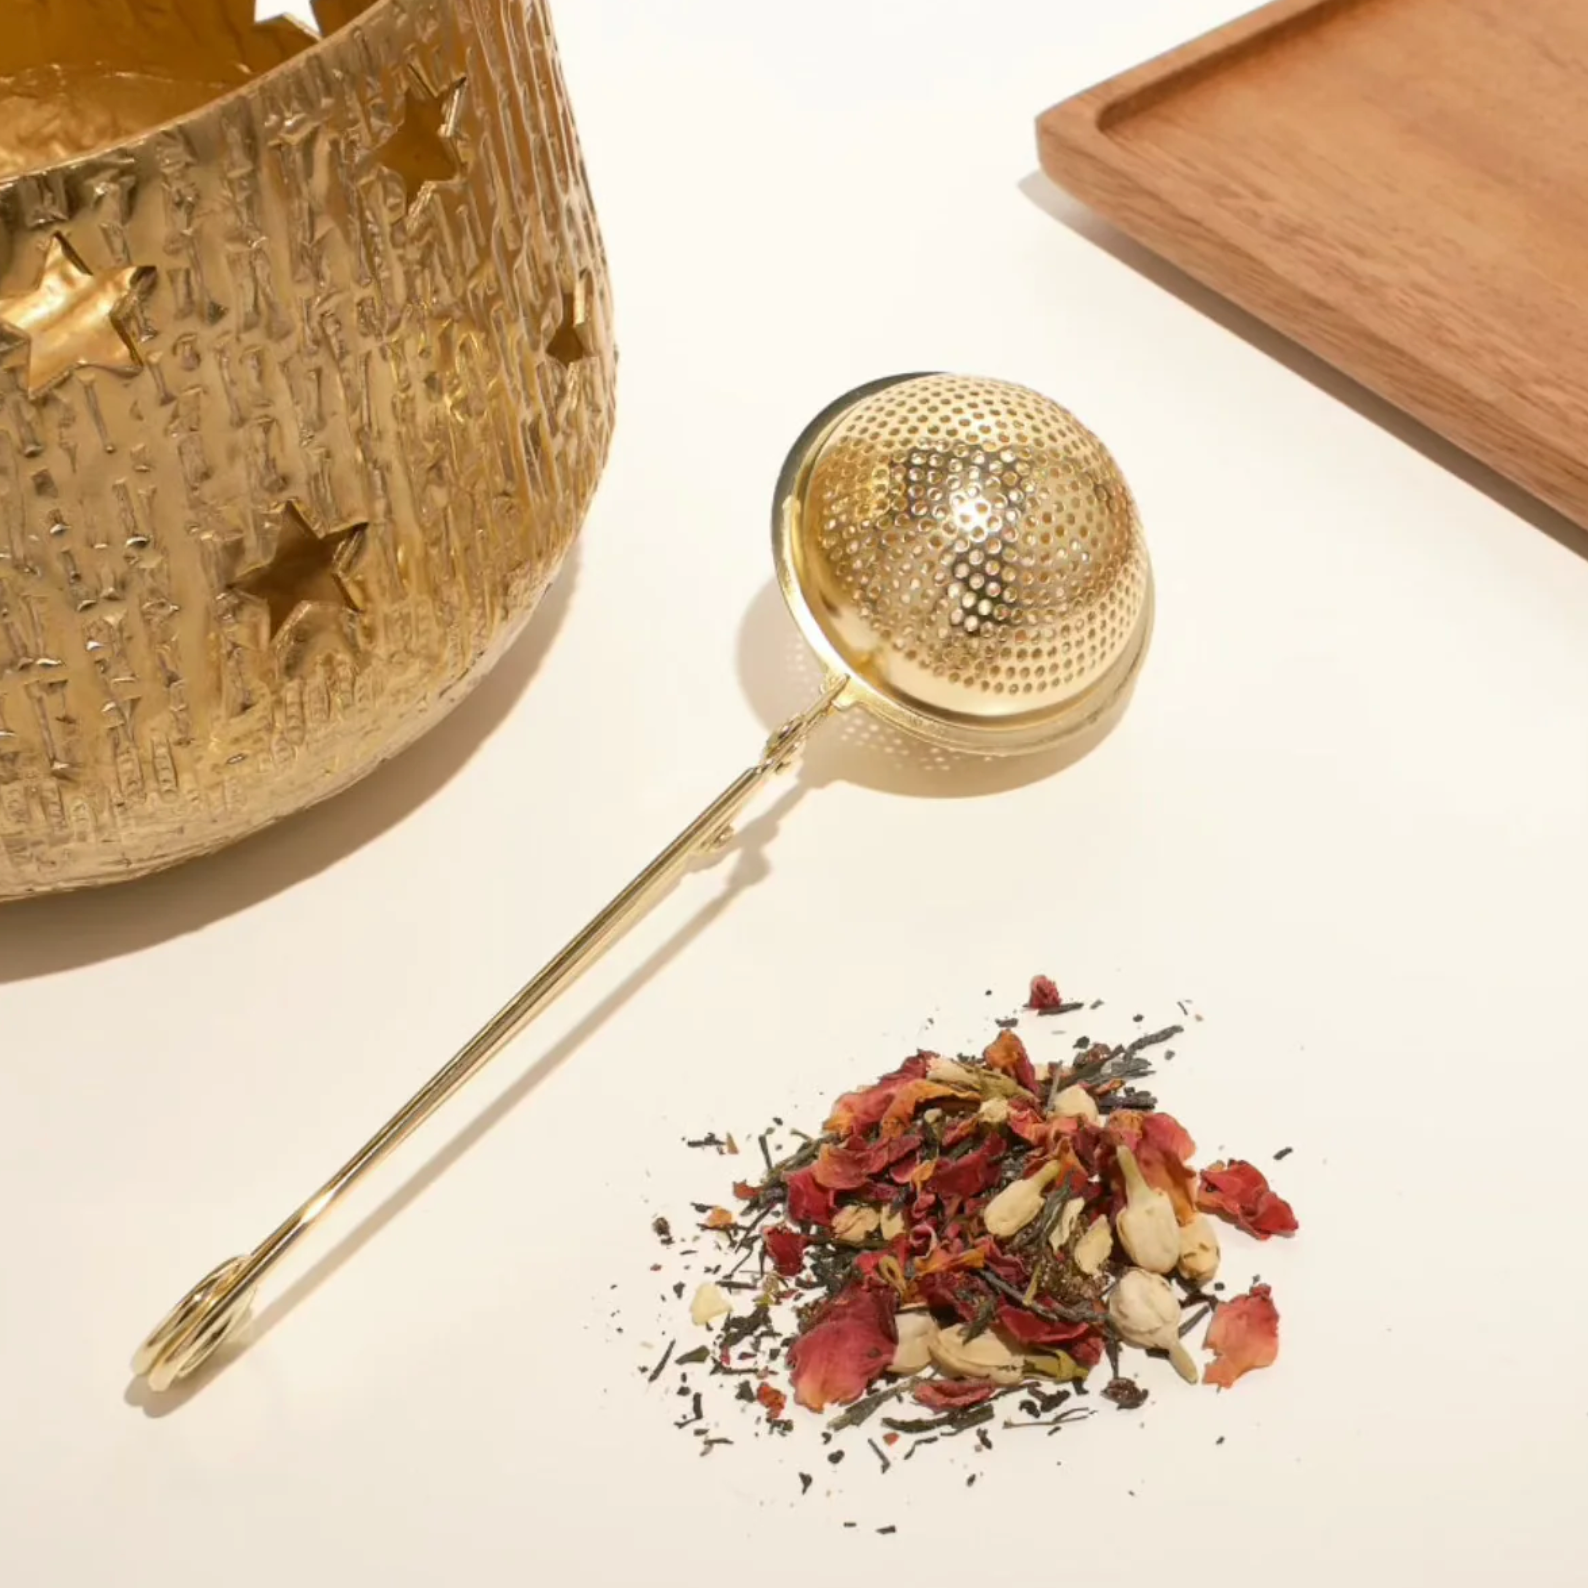 A golden tea infuser lies next to a small pile of Organic Tea leaves and flowers. An intricately designed golden container with star cutouts stands on the left, and a wooden tray is positioned in the background to the right, adding a touch of elegance to your Bestsellers of Magic Tea Starter Set- 60-75 cup sampler box by Magic Hour ritual.